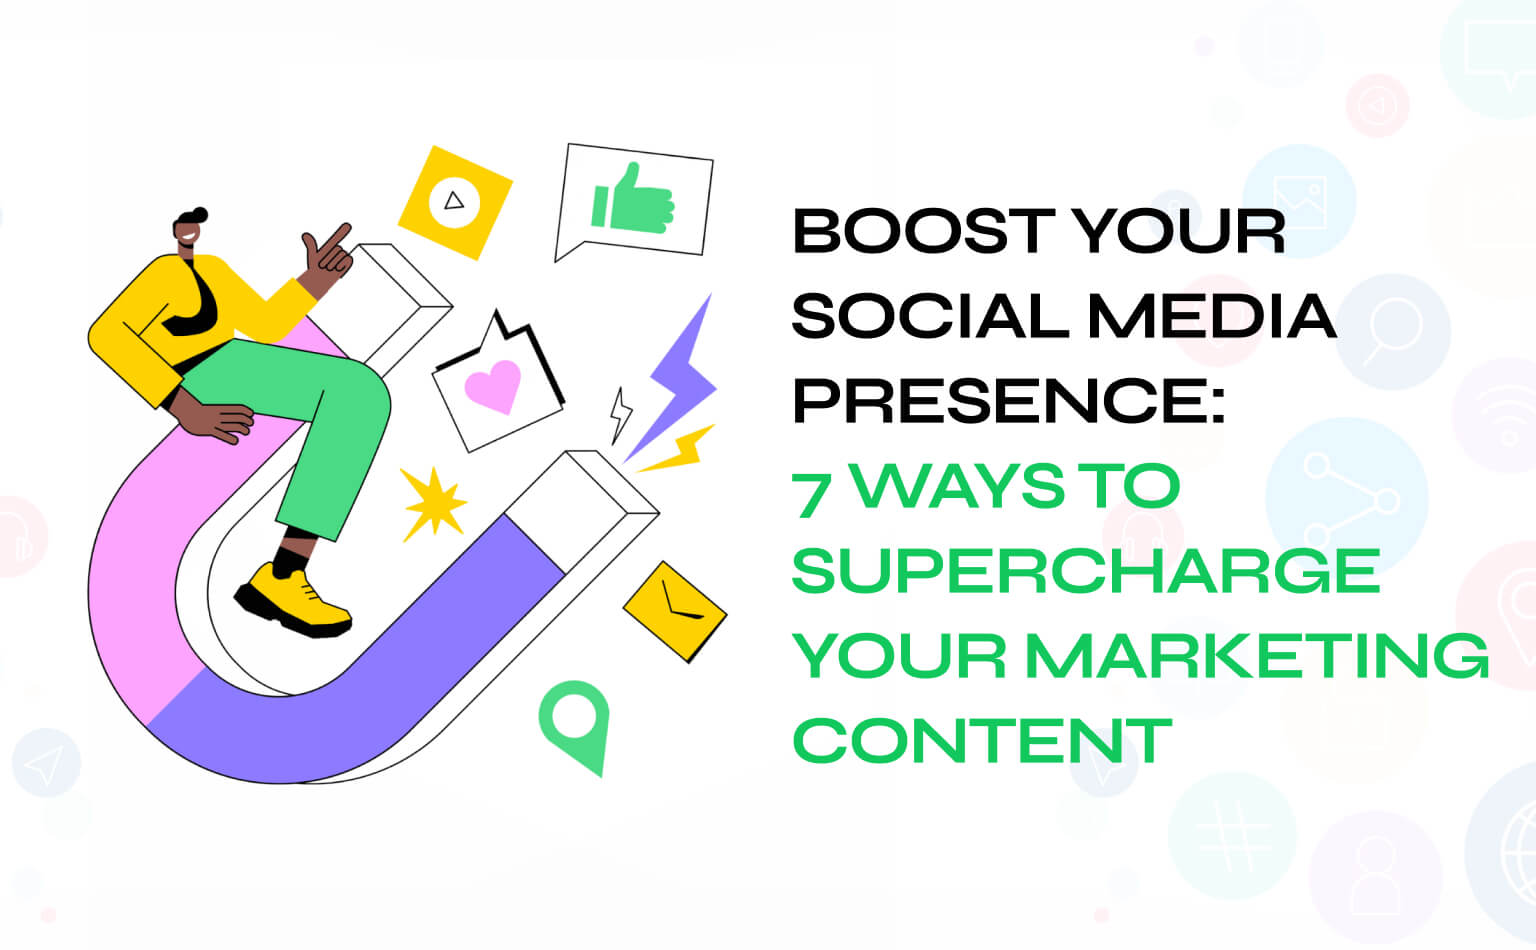 Boost your Social Media presence_ 7 ways to supercharge your marketing content